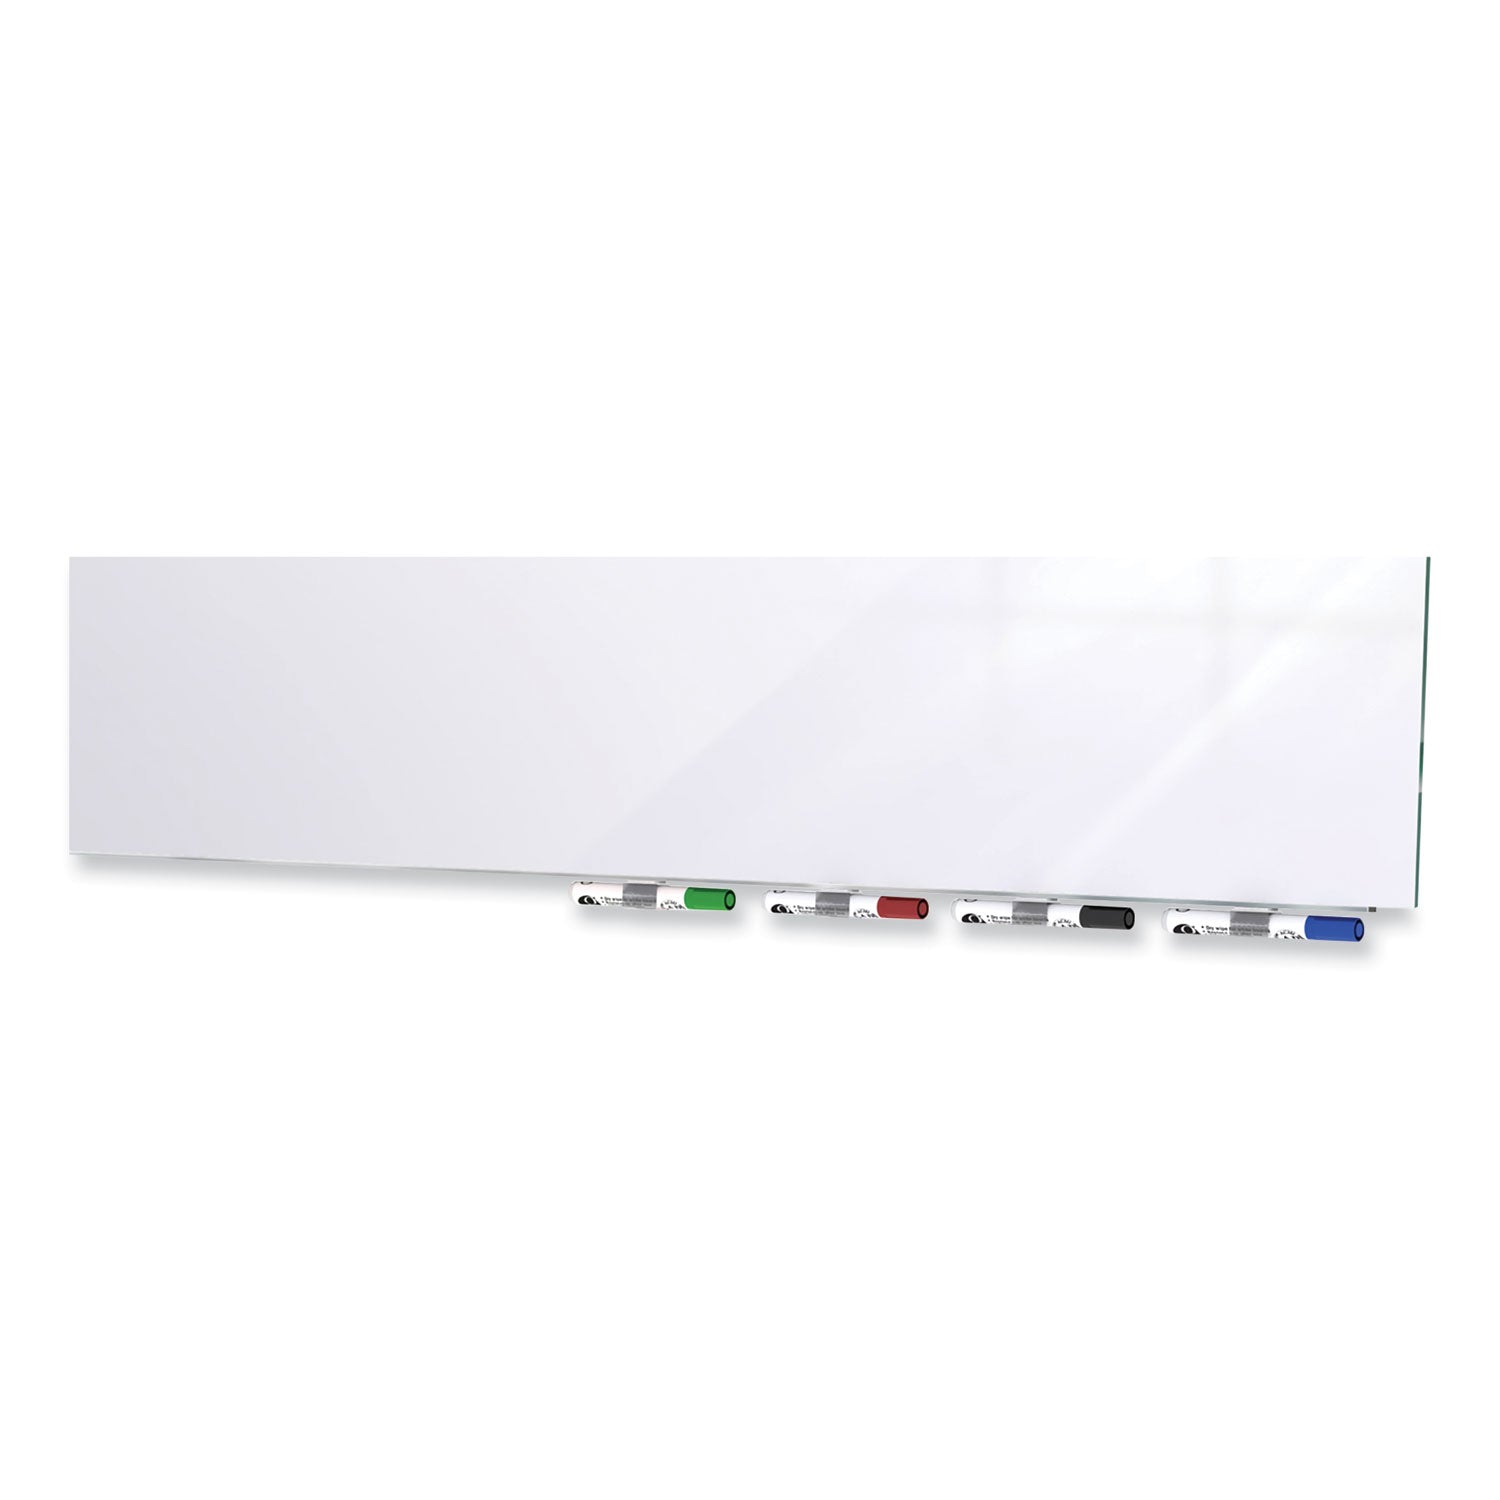 aria-low-profile-magnetic-glass-whiteboard-120-x-48-white-surface-ships-in-7-10-business-days_gheariasm410wh - 2